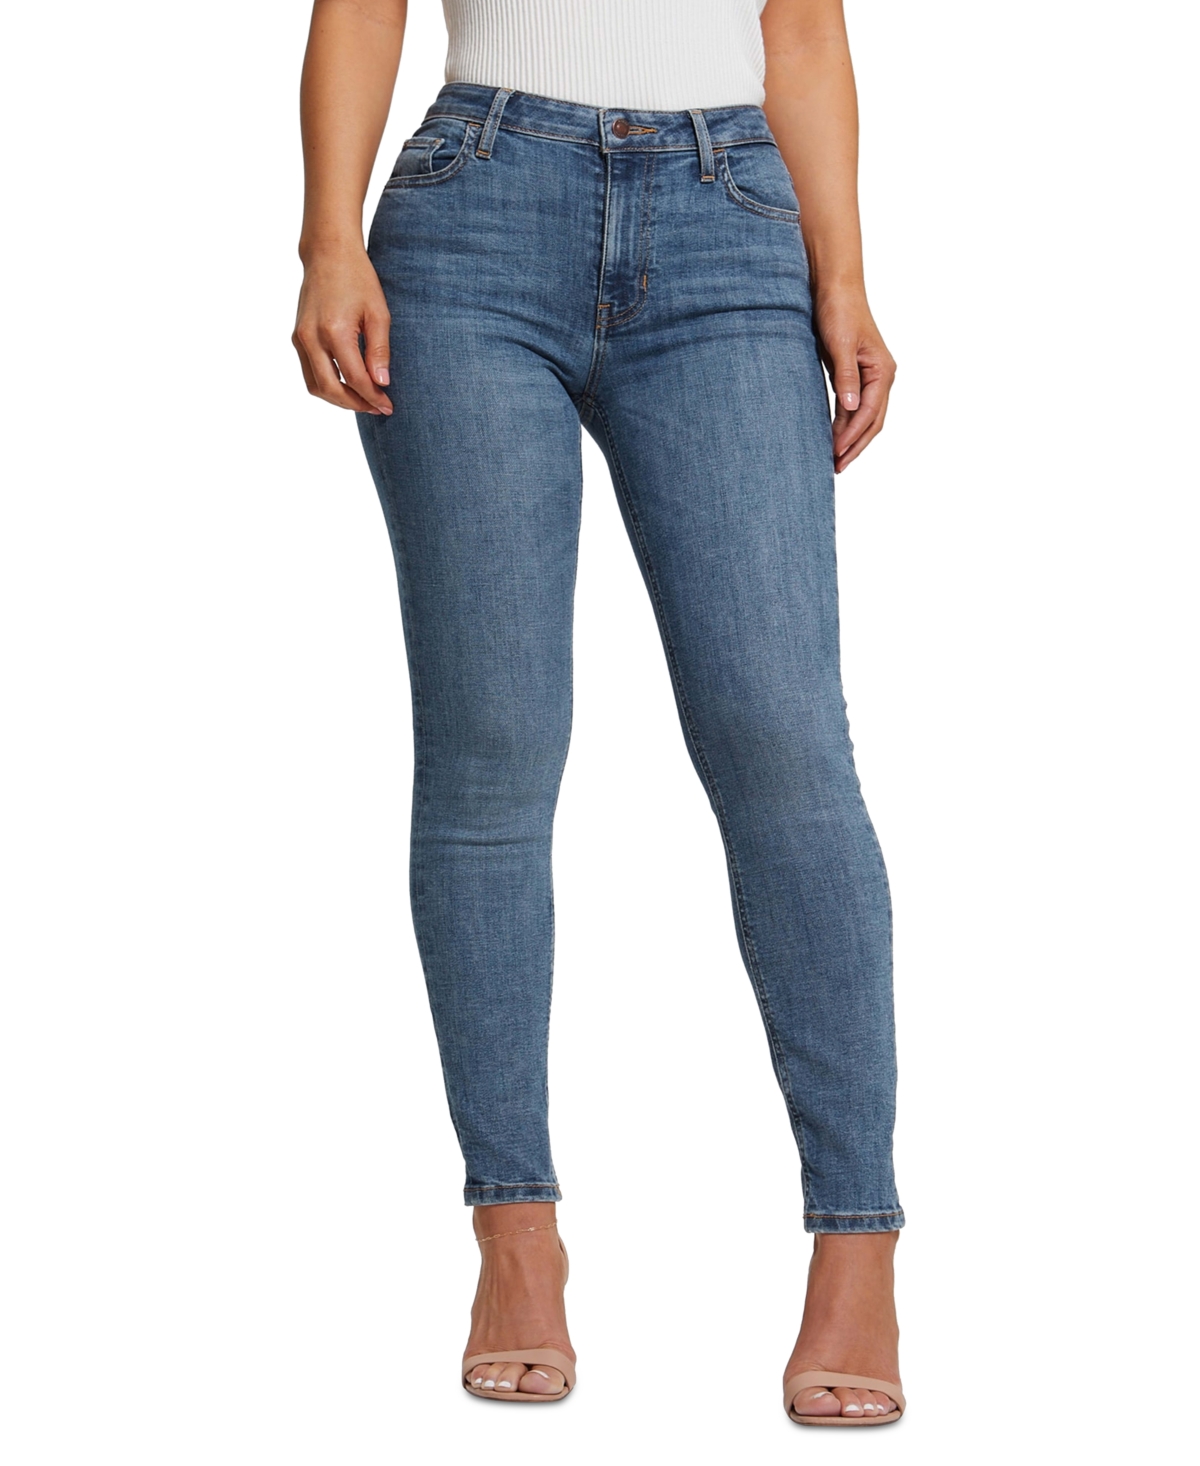 GUESS WOMEN'S ALPHA HIGH-RISE SKINNY JEANS